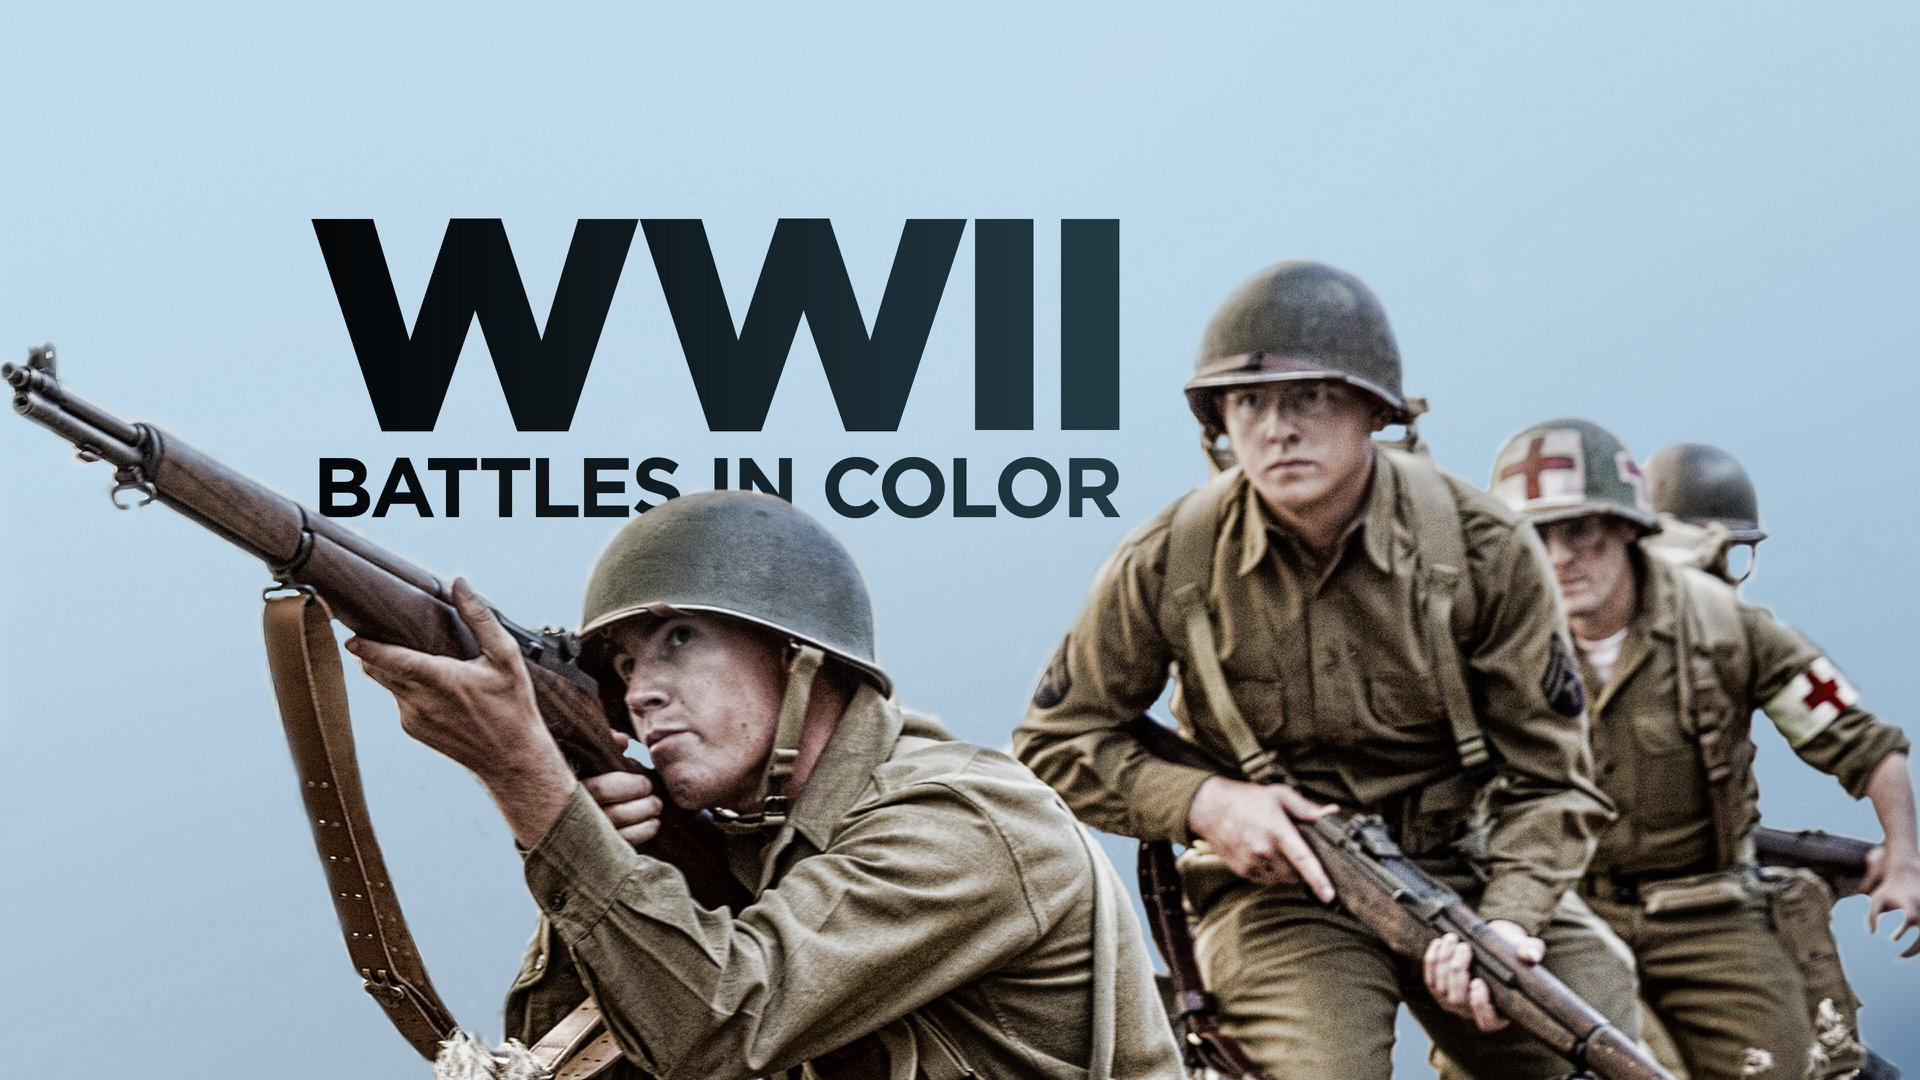 WWII Battles In Colour